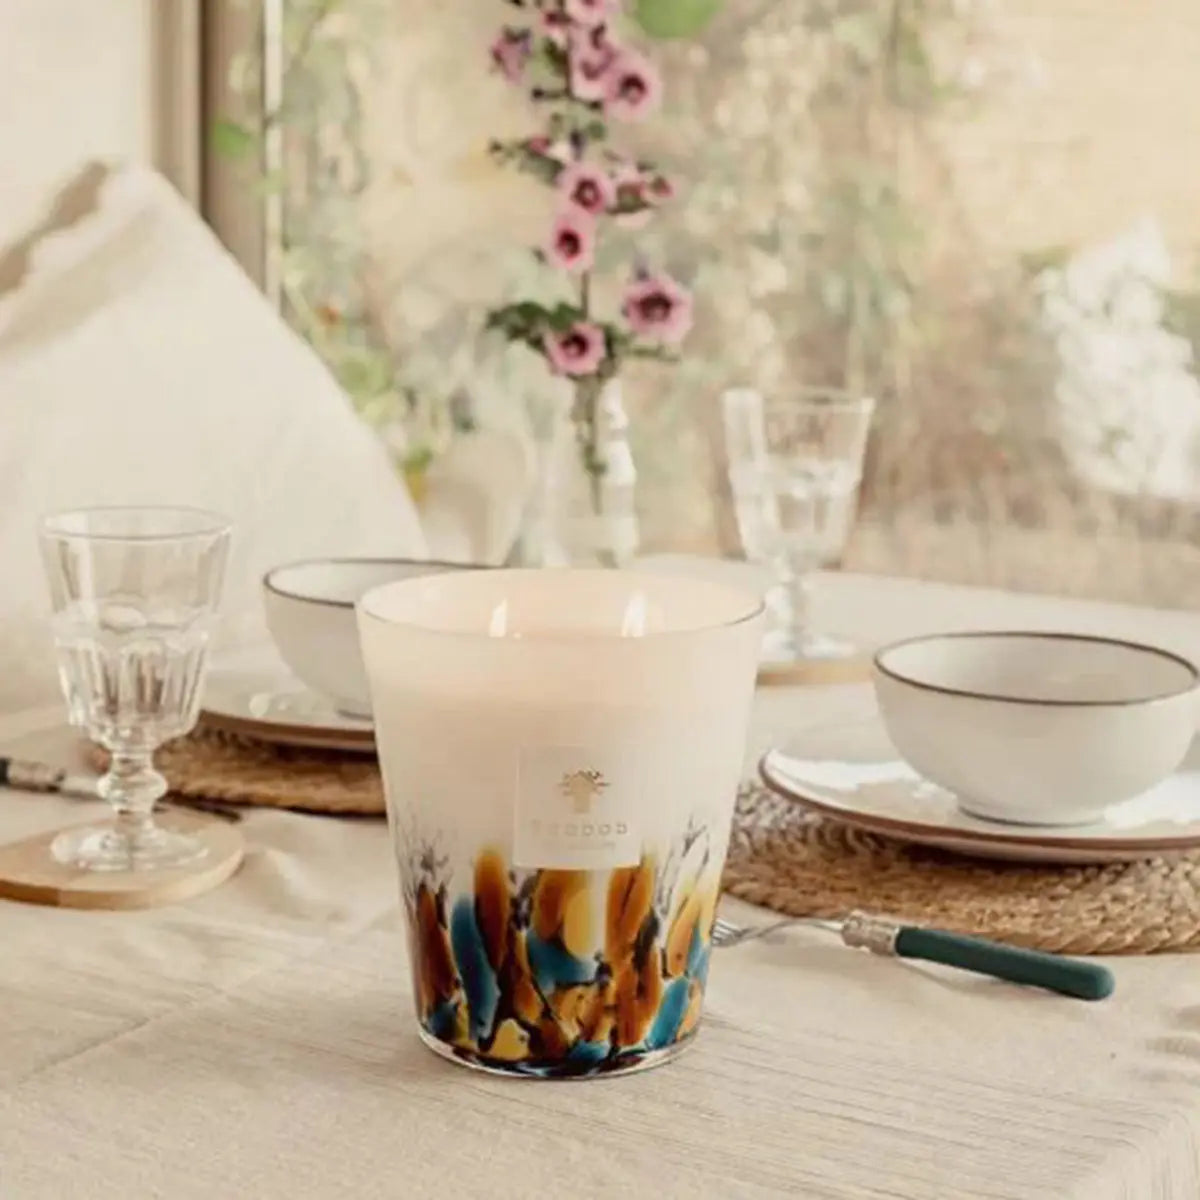 Baobab Collection Max 24 Rainfoest Mayumbe Candle set on a dining table with dinnerware and flowers in a vase